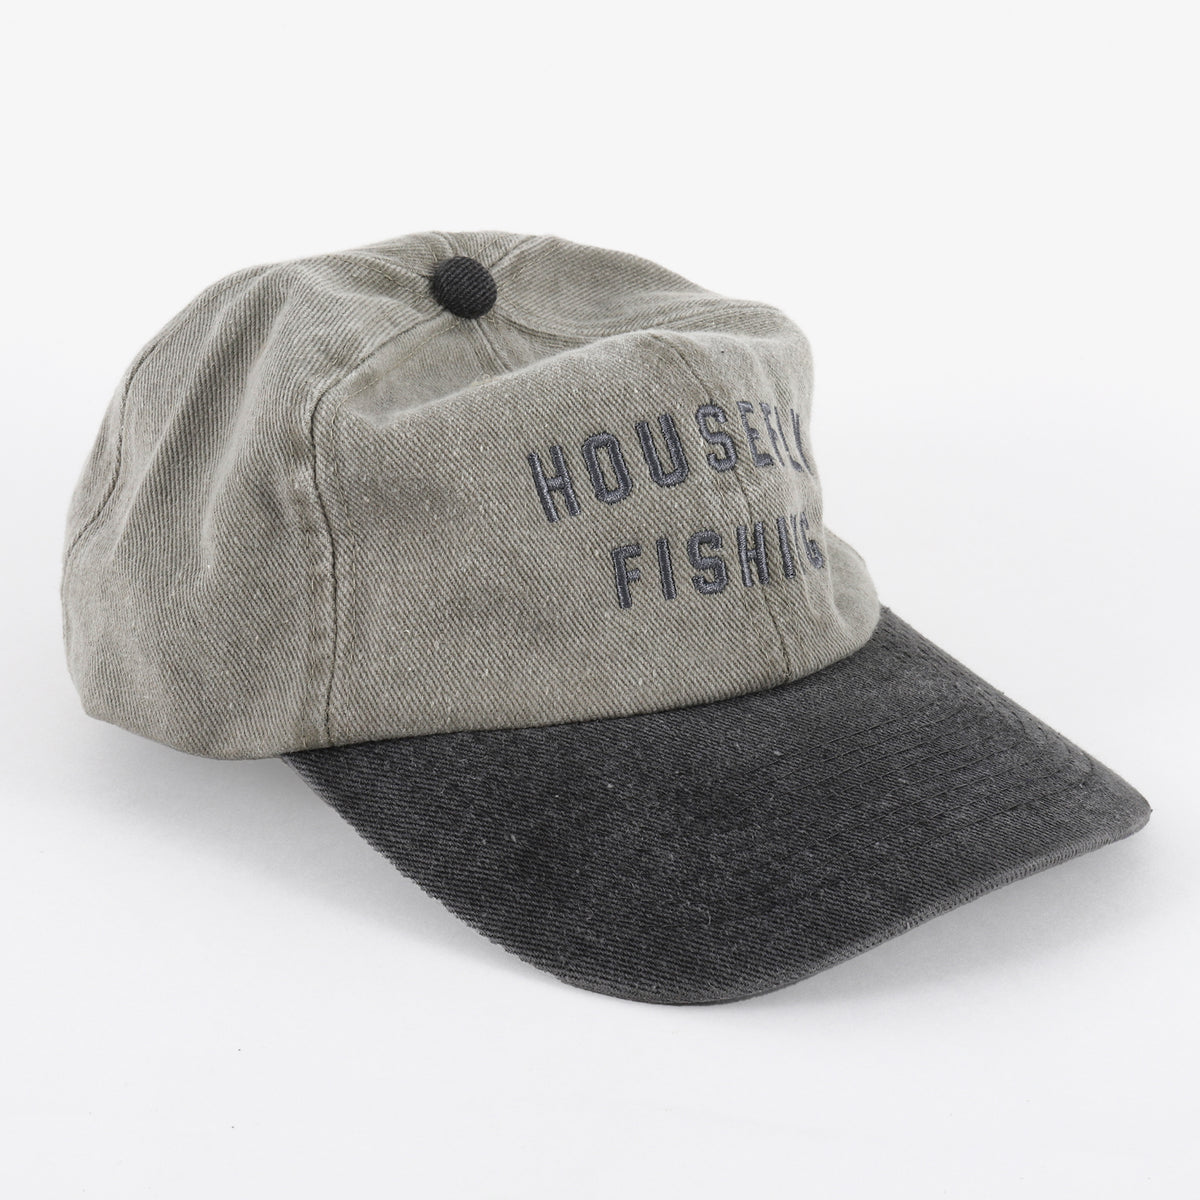 Housefly Classic Hat